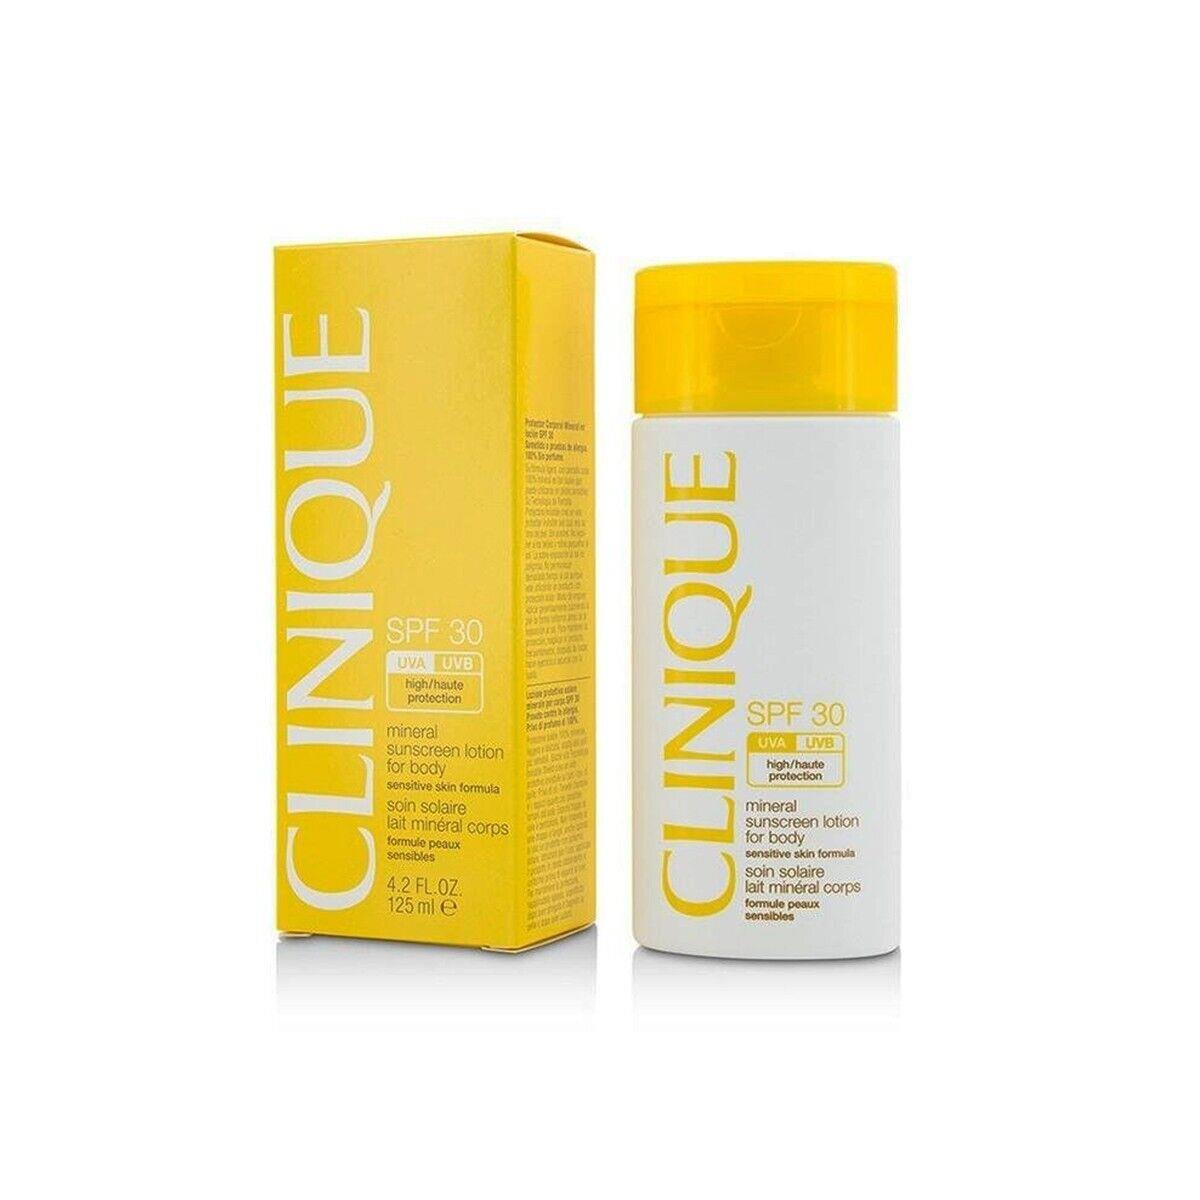 Clinique Mineral Sunscreen Lotion For Body SPF30 - Size 4.2 Oz. / 125mL